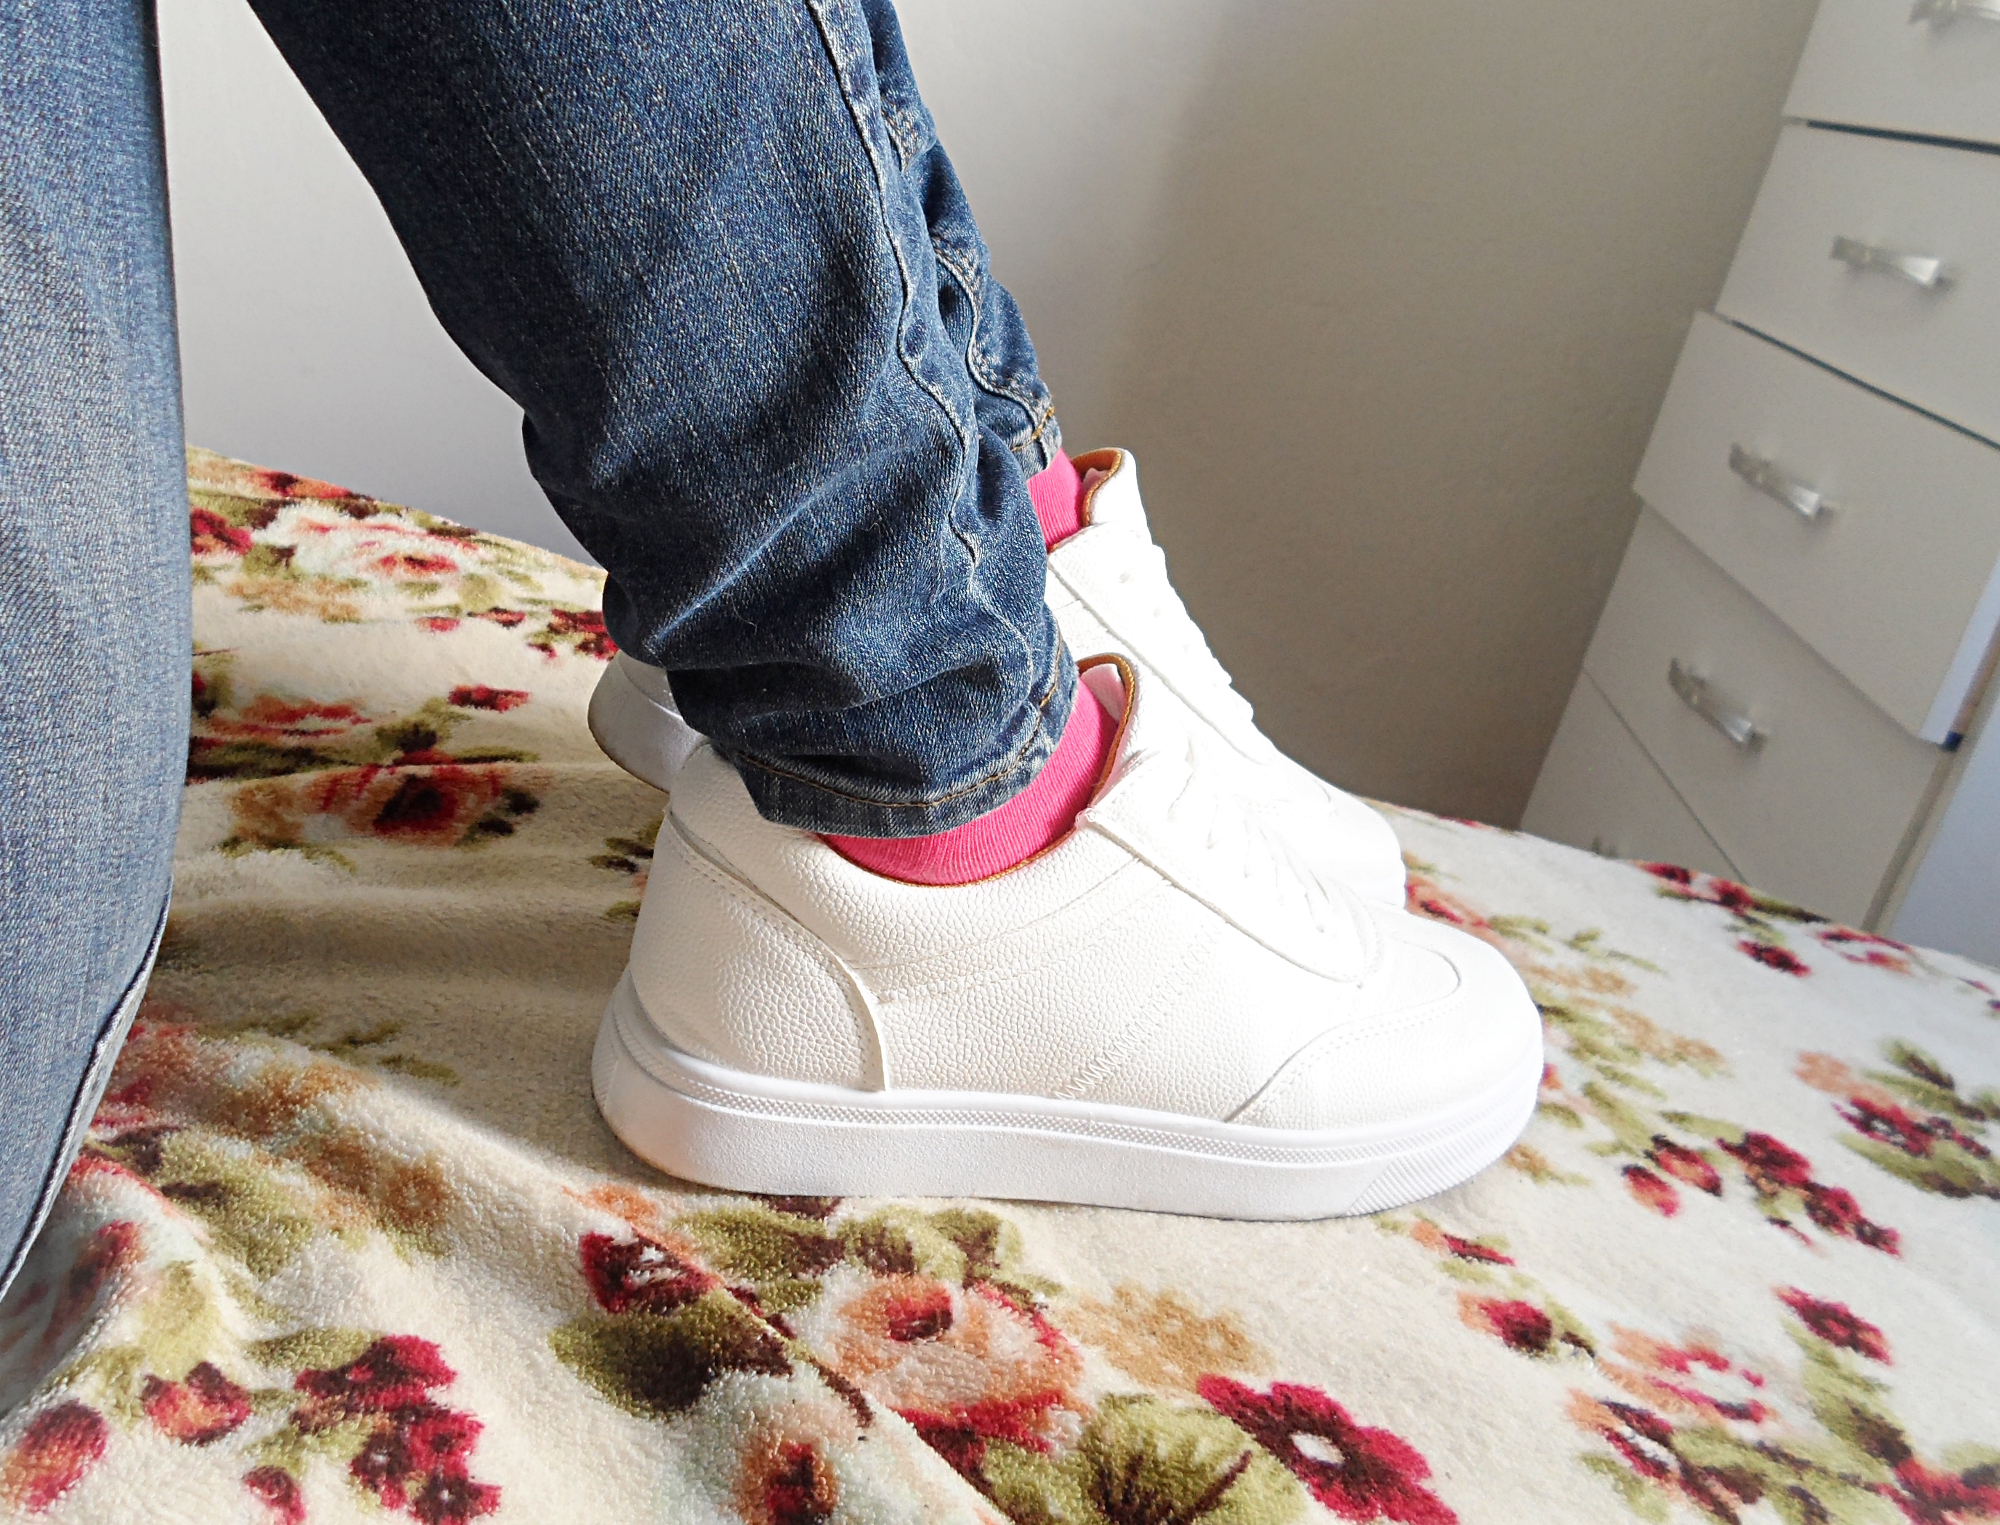 close up of legs in jeans and socks wearing white basic sneakers